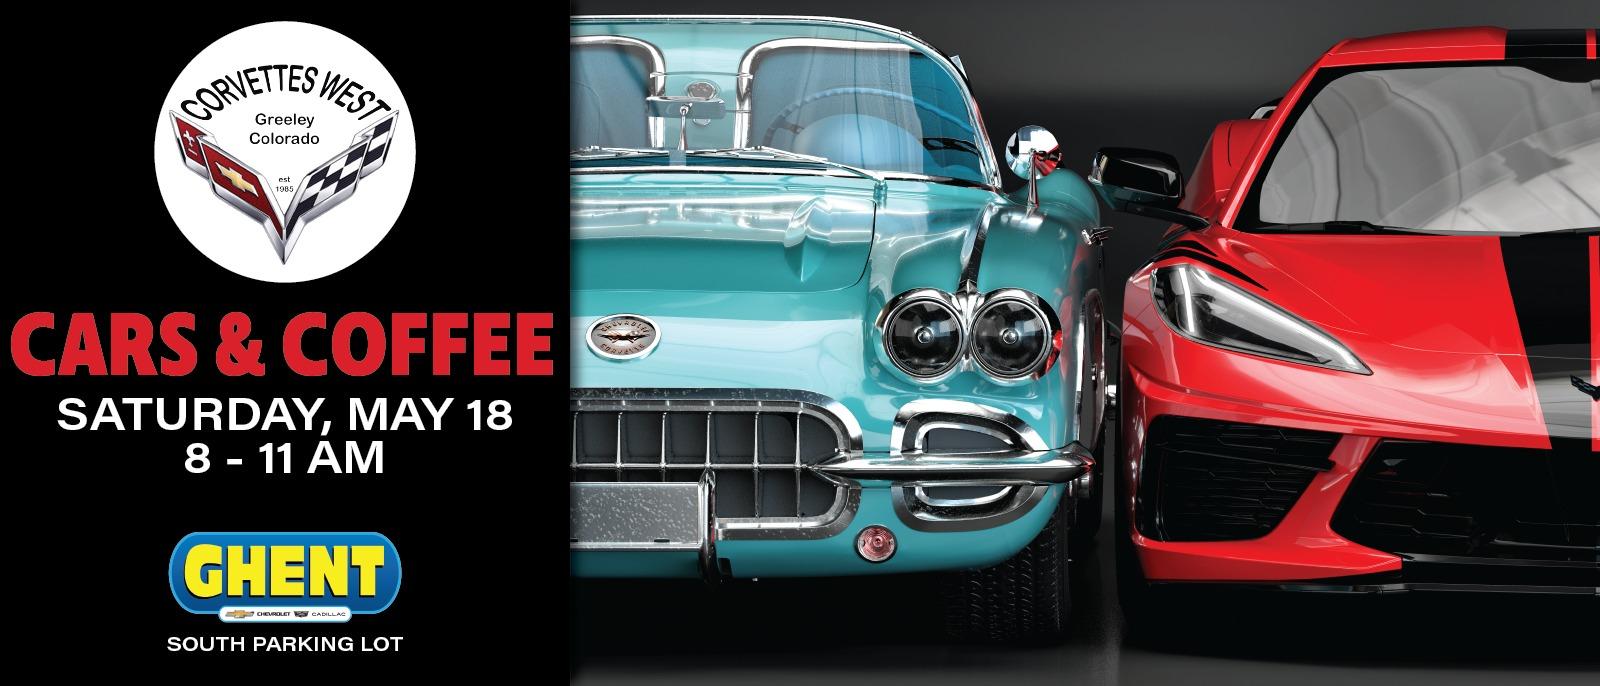 Cars & Coffee
Sat, May 18, 8-11 AM